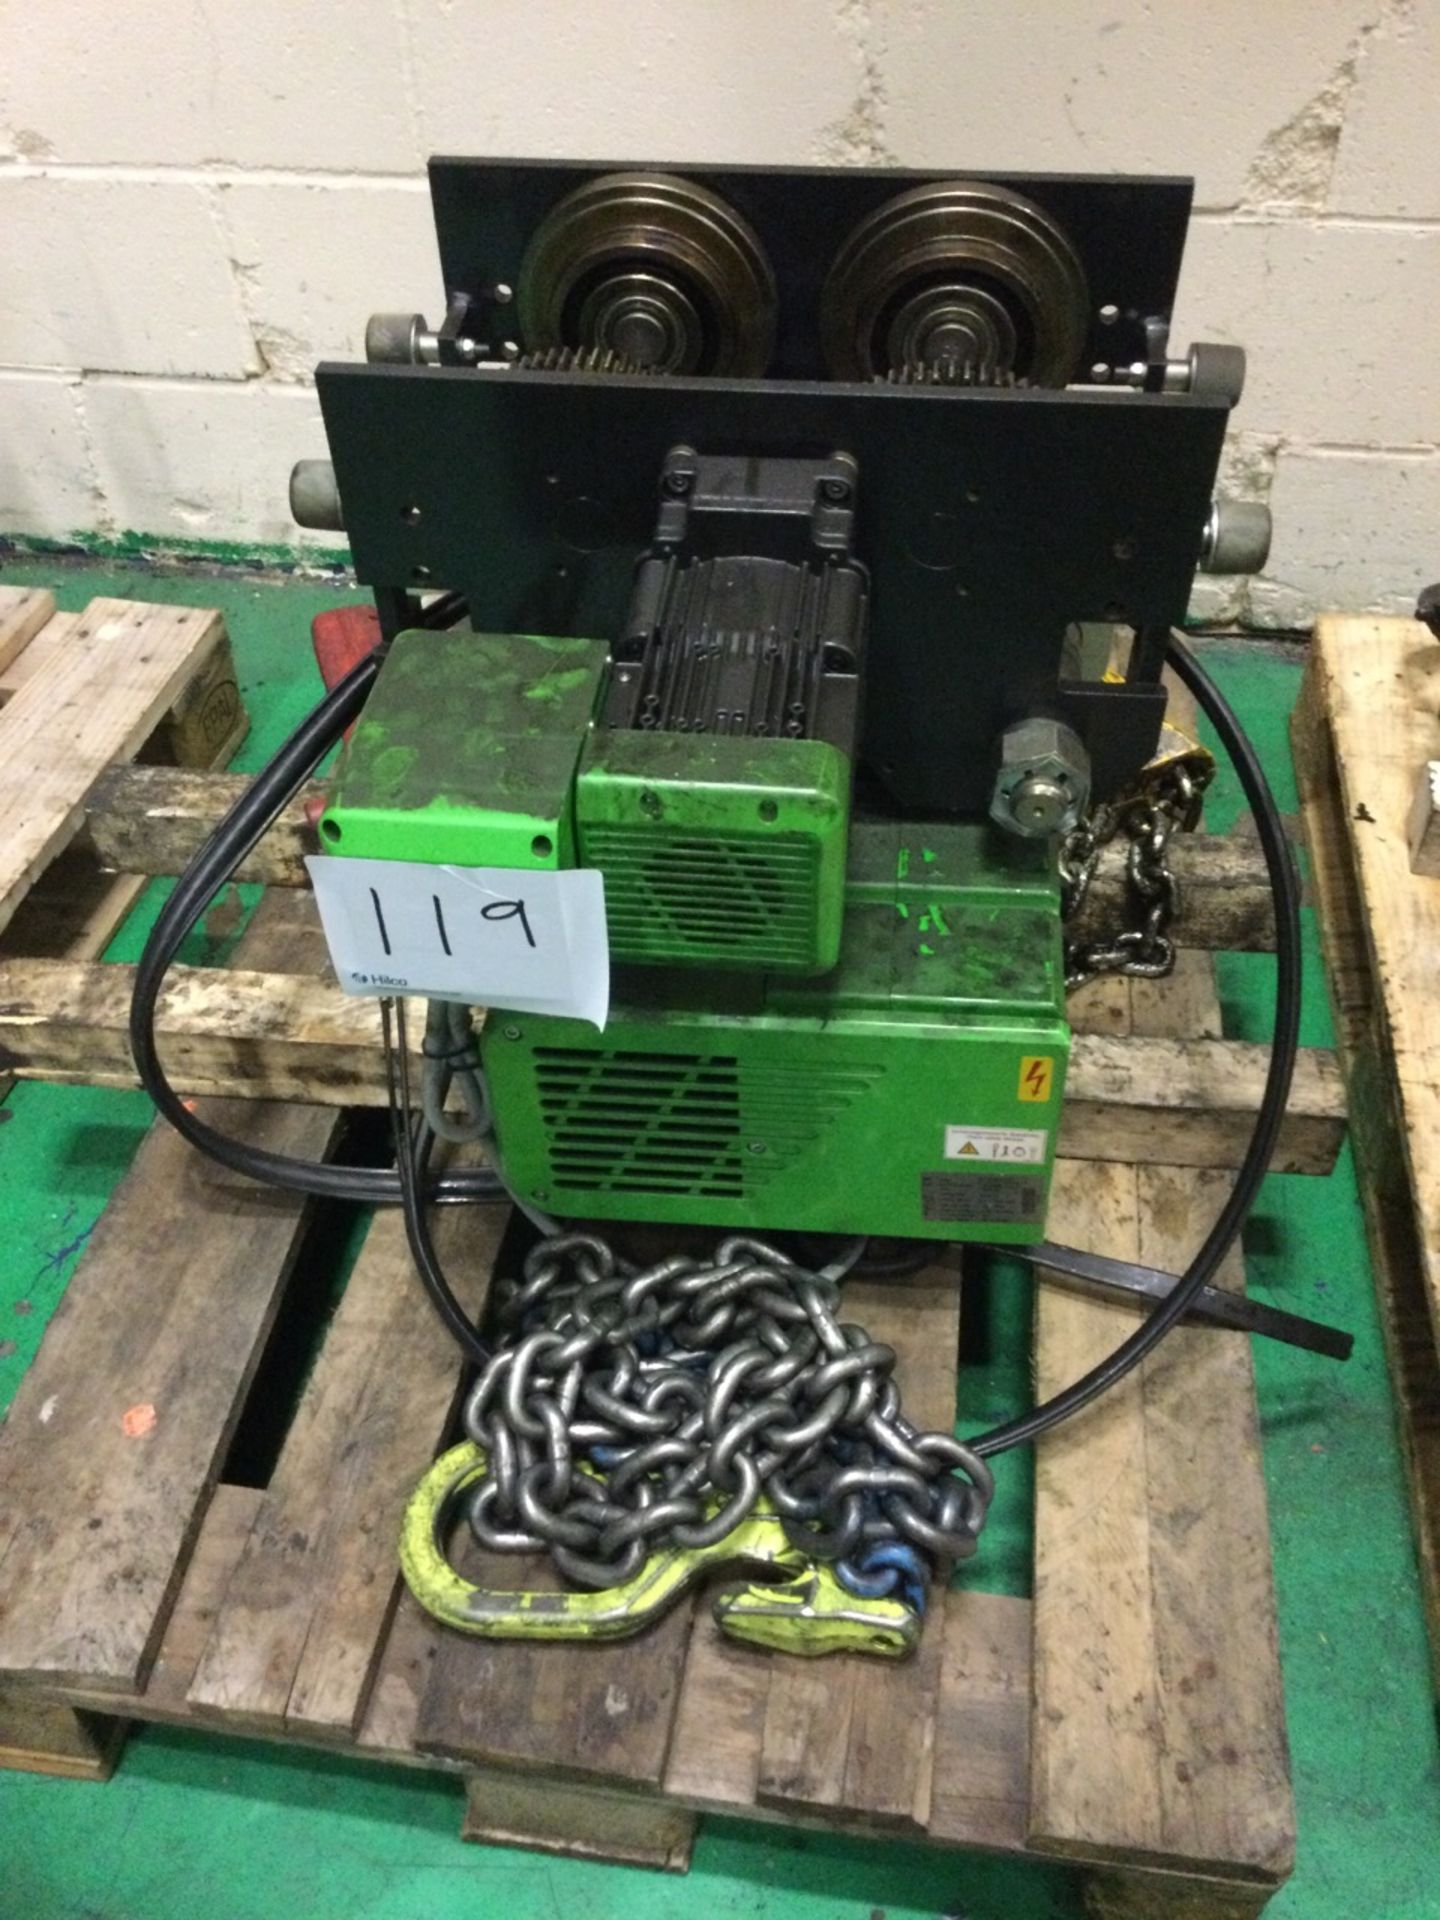 1 Stahl, ST50, Electric Chain Hoist With Pendant Control, 5 Tonne Rated Capacity(Removed From Overh